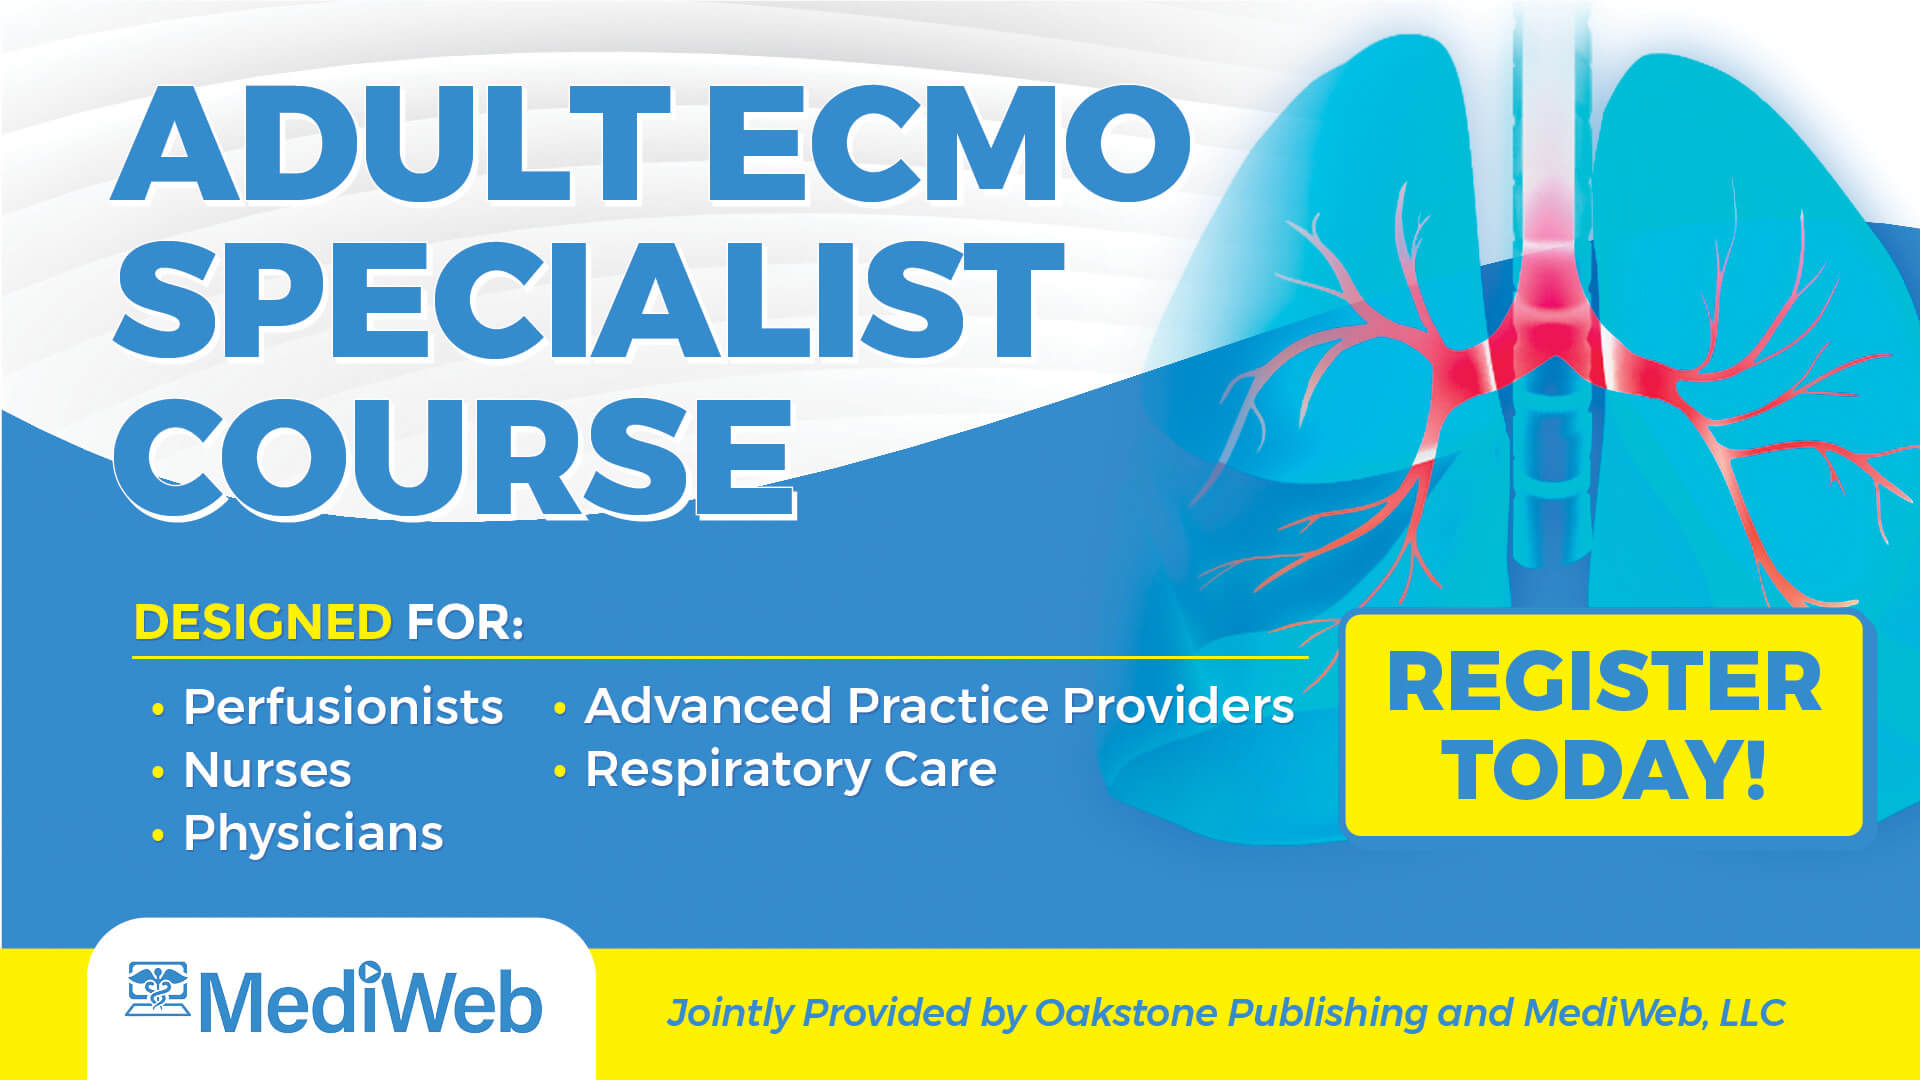 Jointly Provided by Oakstone Publishing and MediWeb, LLCThe Adult ECMO Specialist course